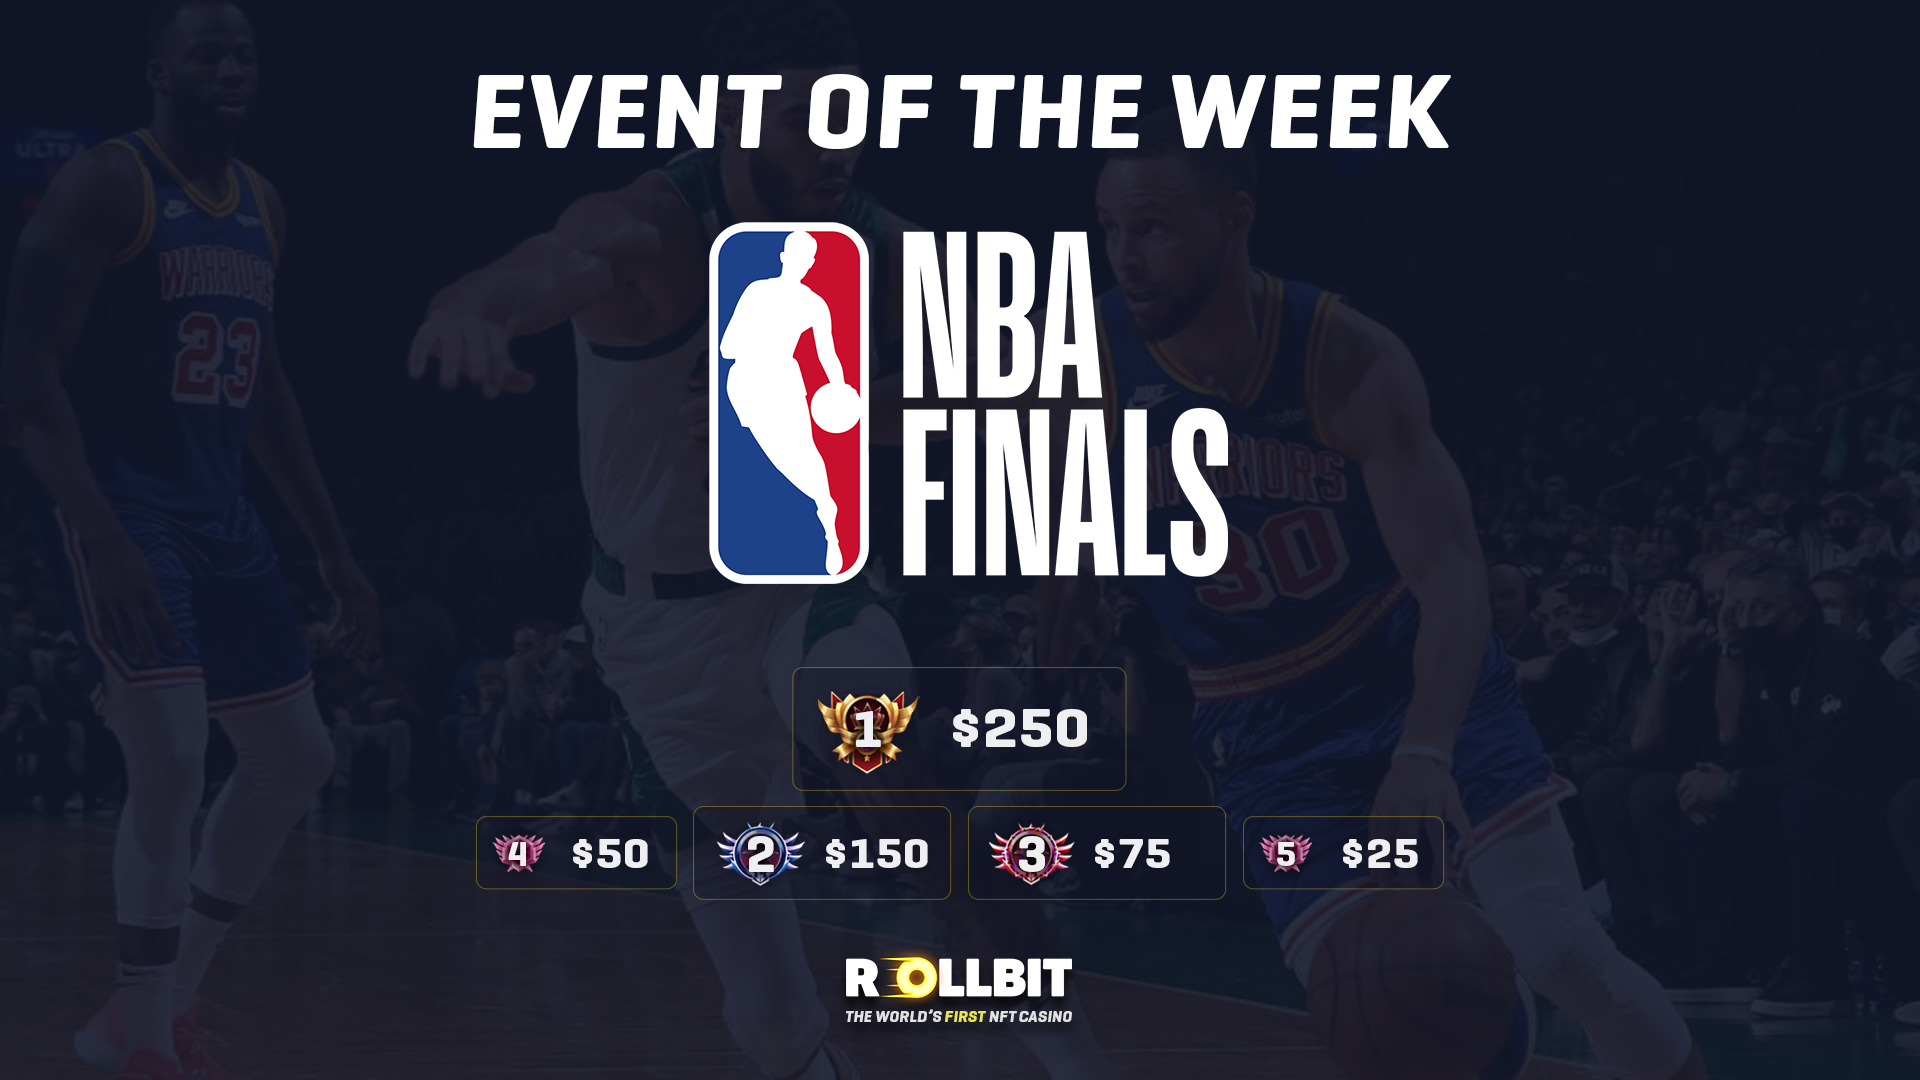 The NBA finals: Sport Event of the Week 🏀